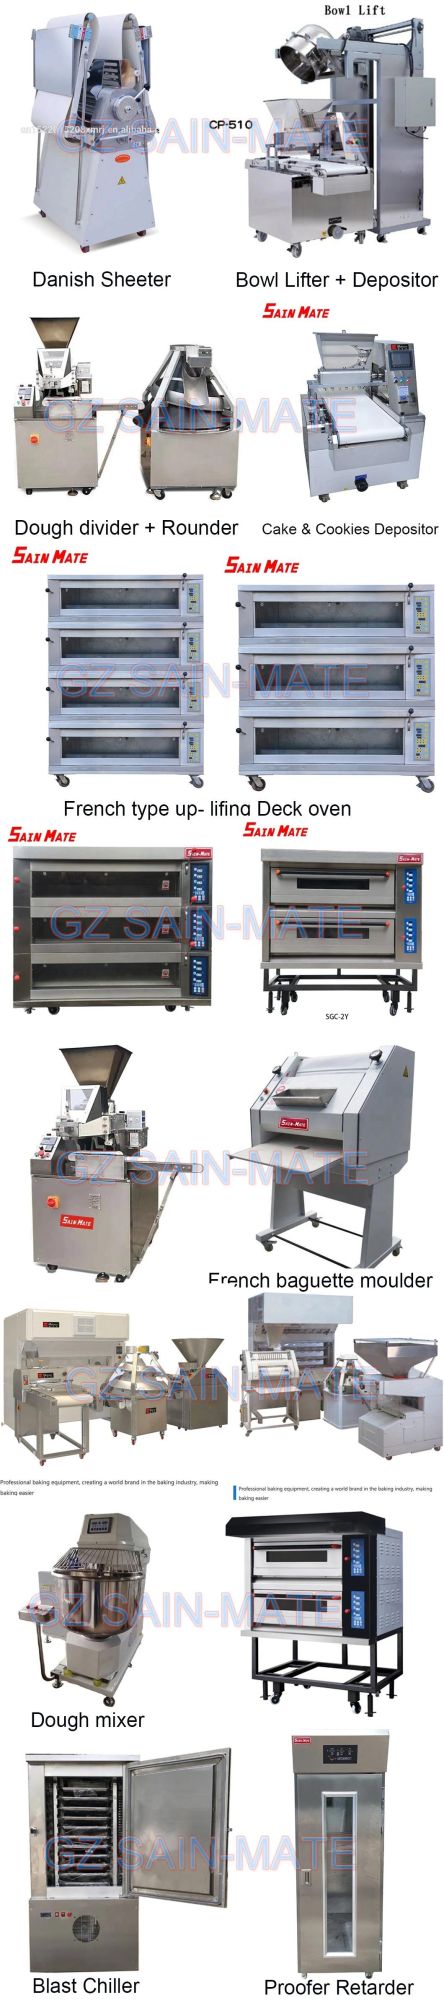 Gas Diesel Electric Industrial Rotary Oven for Bakery Sale Bread Baking, Italy Commercial 8 10 12 16 32 64 Trays Rack Rotary Oven Price